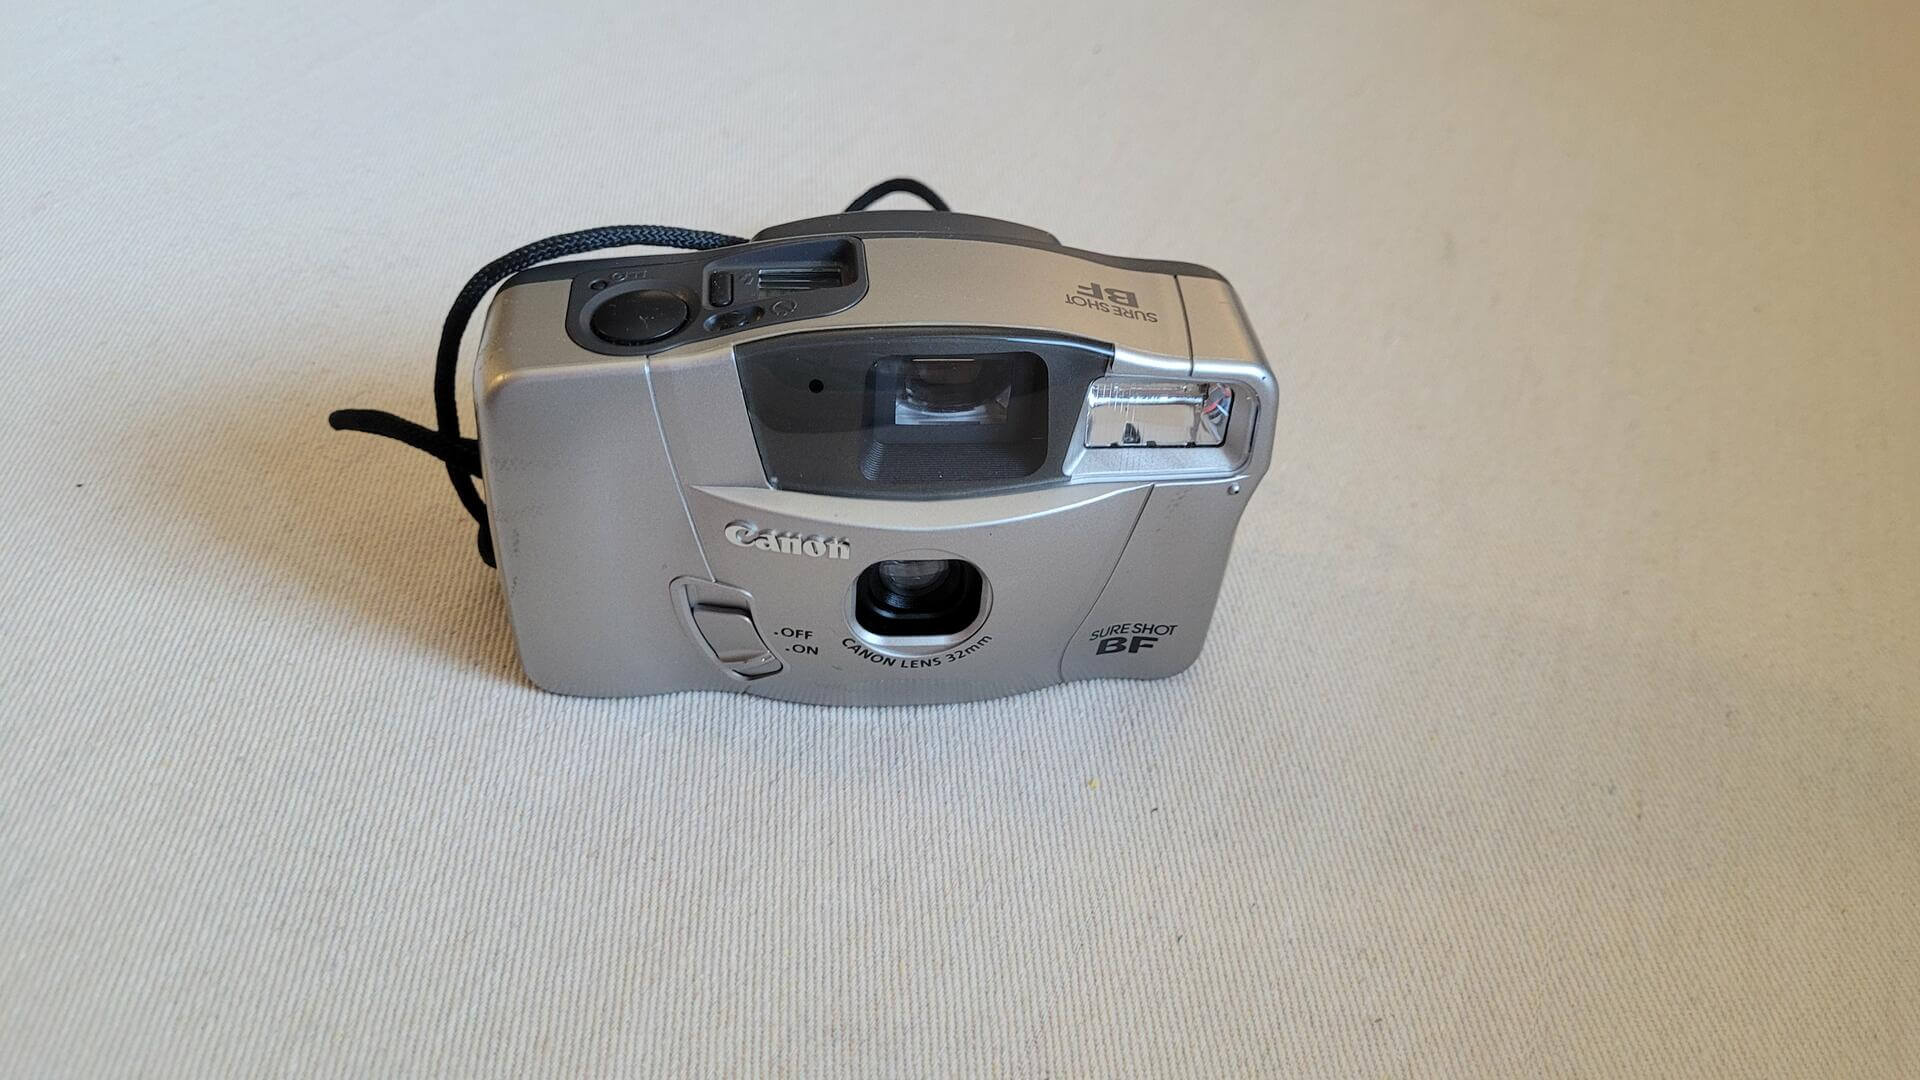 The Canon Sure Shot BF (aka Prima BF-9S) is fully automatic 35mm point-and-shoot vintage camera from 2000 with bright and large viewfinder. One of best selling cameras due to its simple and easy to use design.